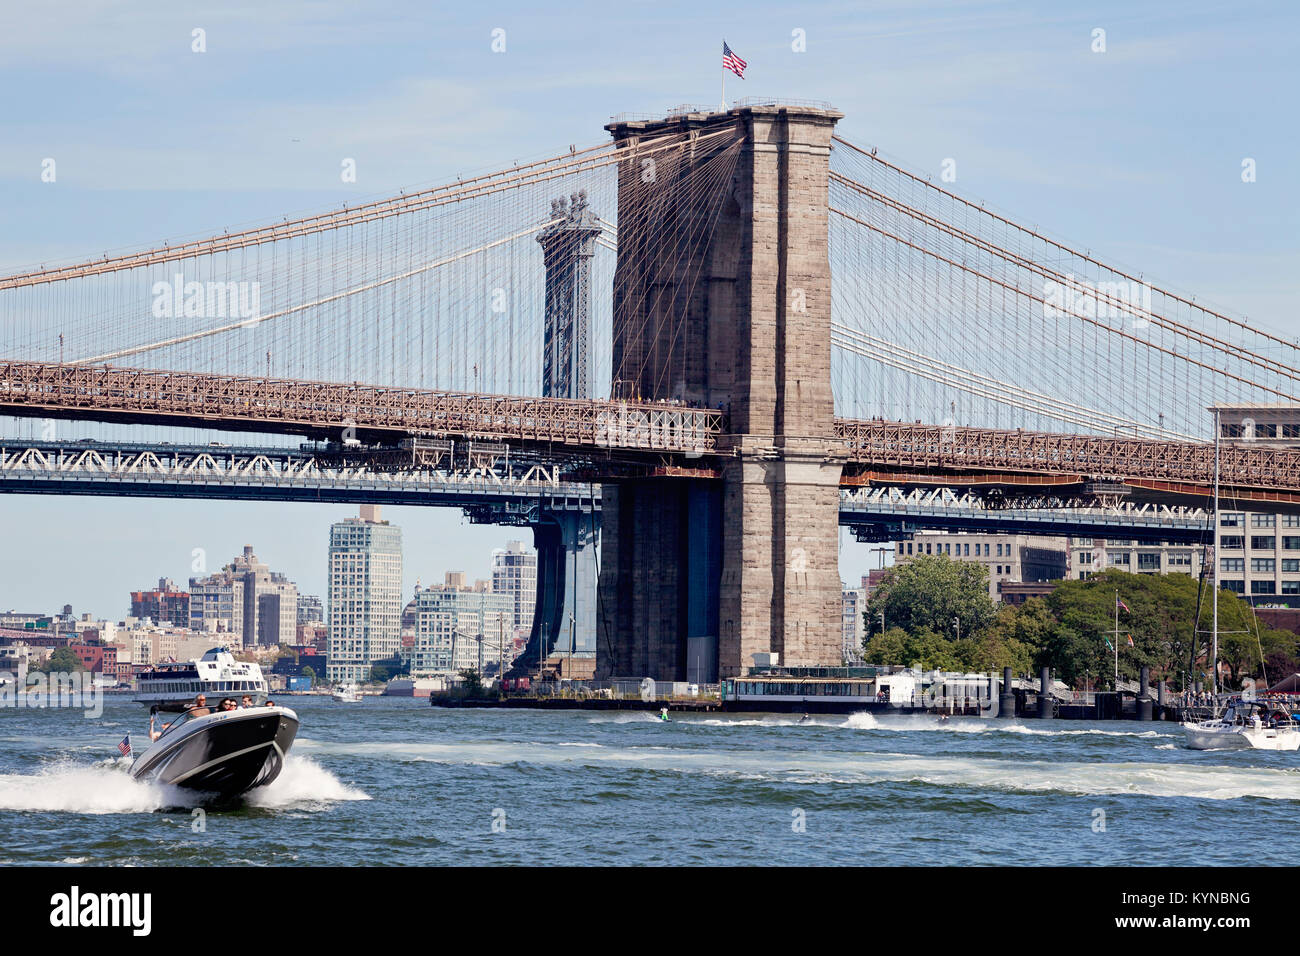 On the water, East River under the Brooklyn Bridge. Speed boat, ferry, jet skis. Manhattan,  New York. Stock Photo